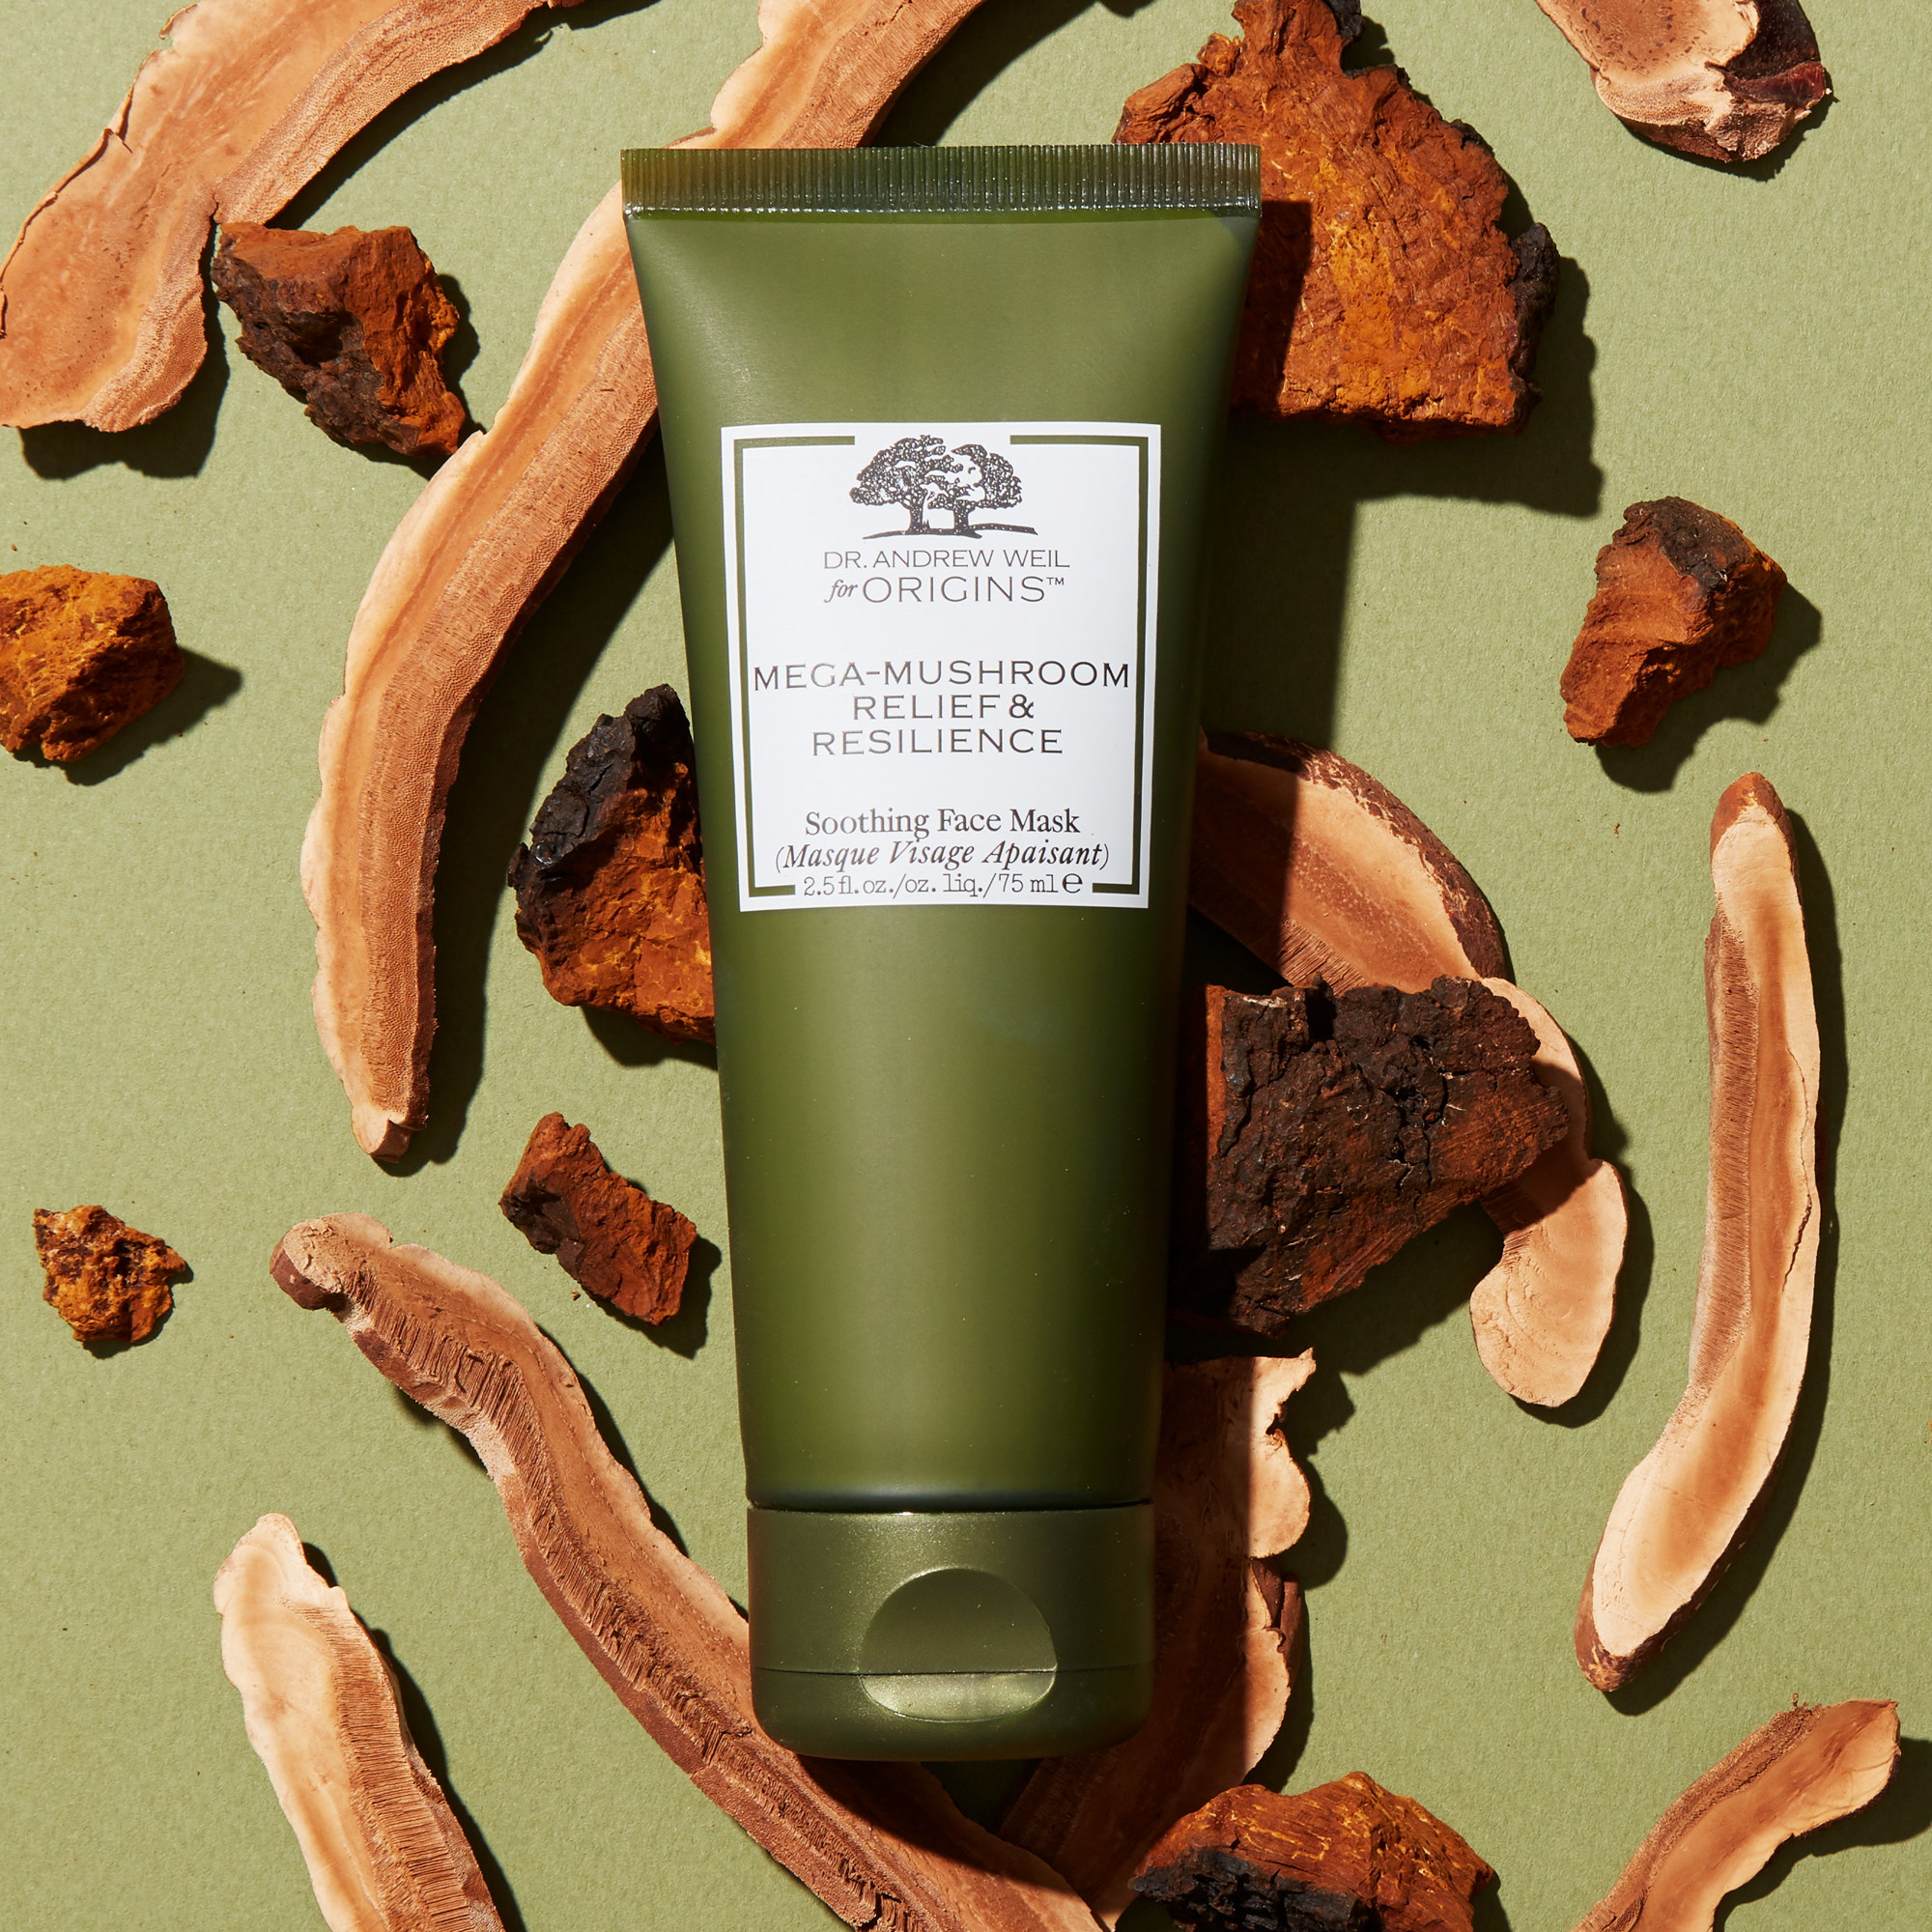 Dr. Weil Mega-Mushroom Relief & Resilience Soothing Face Mask